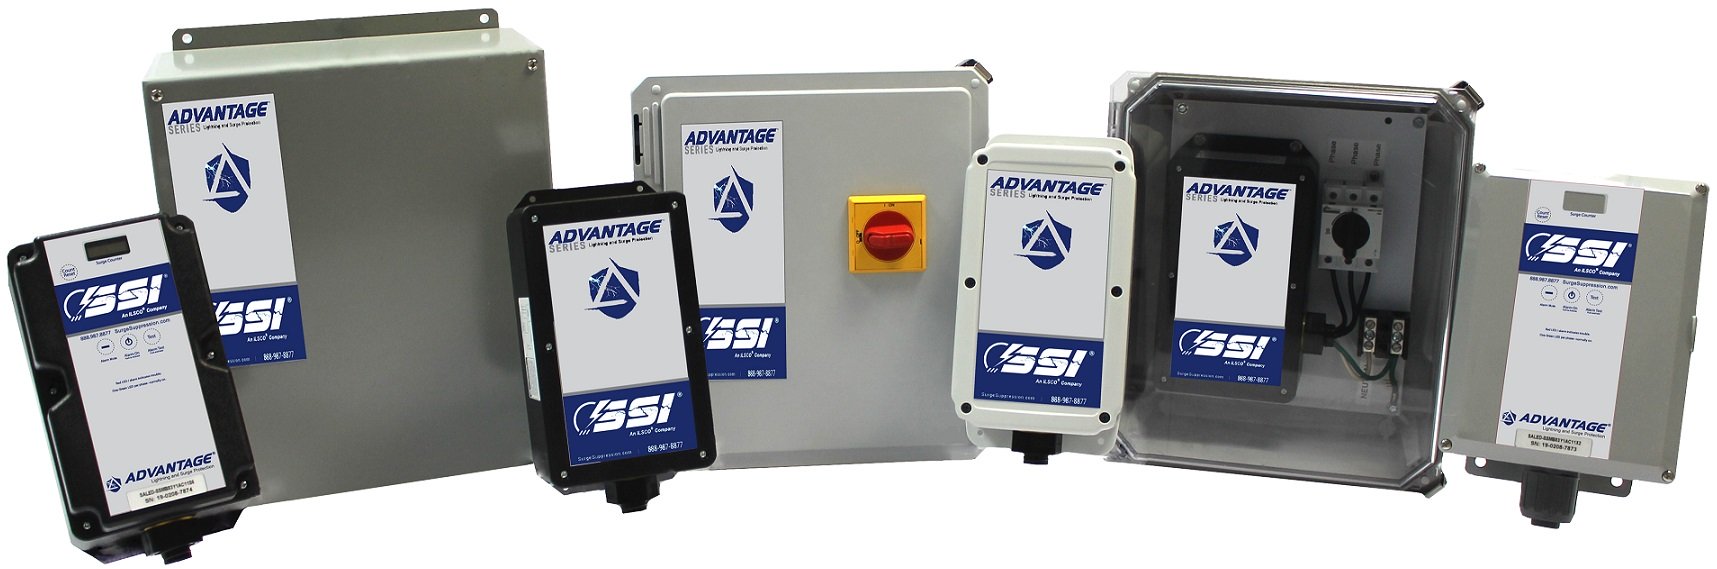 APS LLC | High Quality | High Performance | Transient Voltage Surge Suppressors | Get the Right Gear!